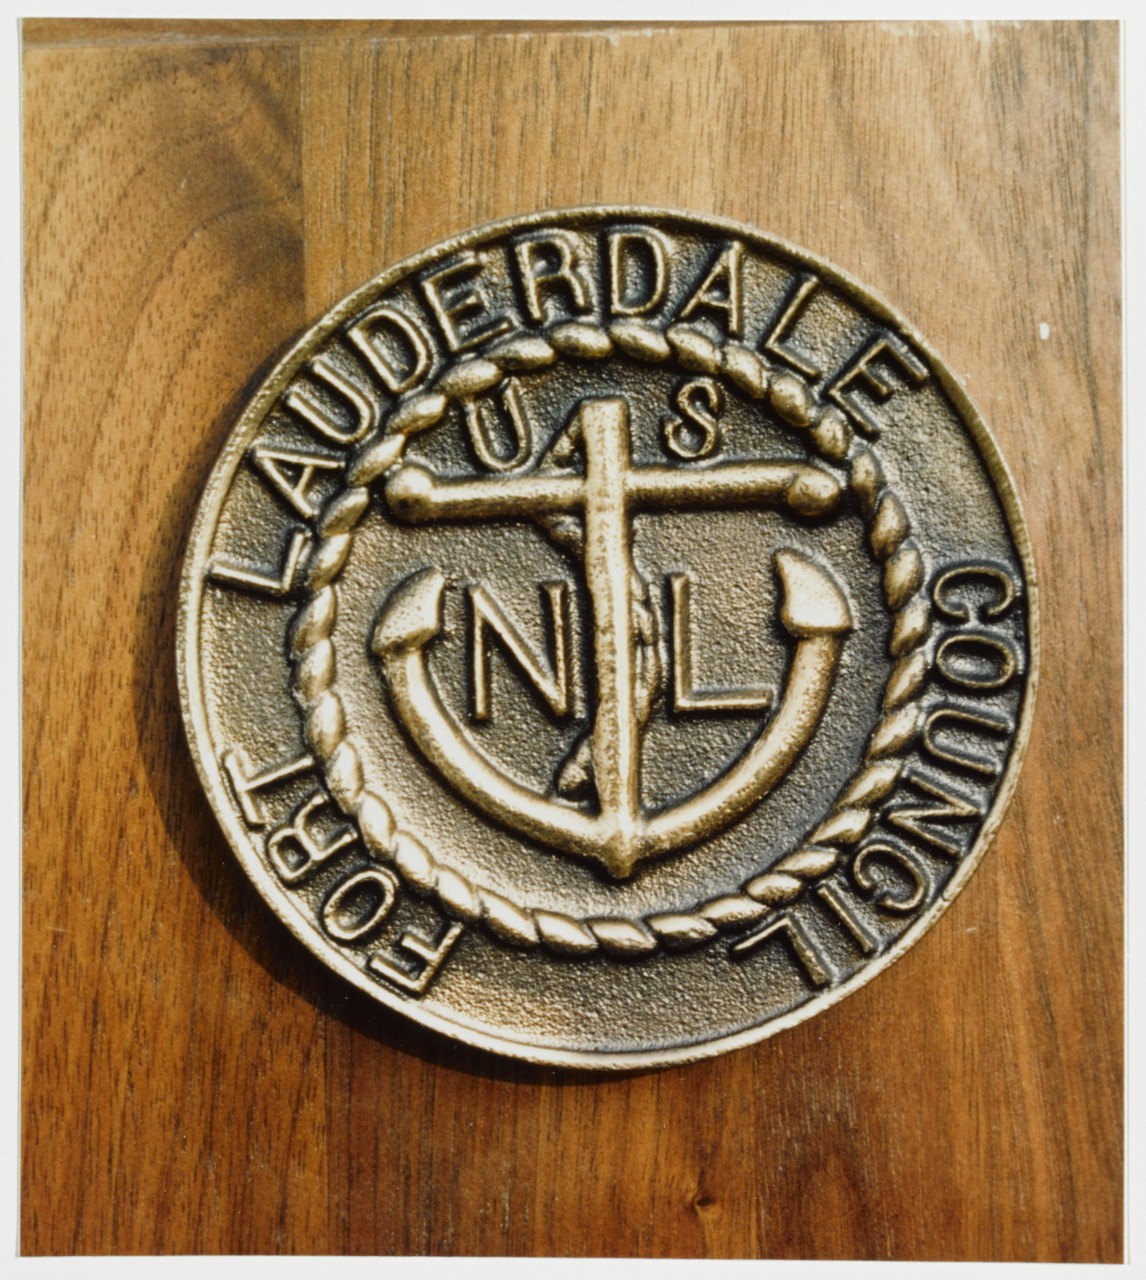 Insignia: United State Navy League, Fort Lauderdale Council, Florida.